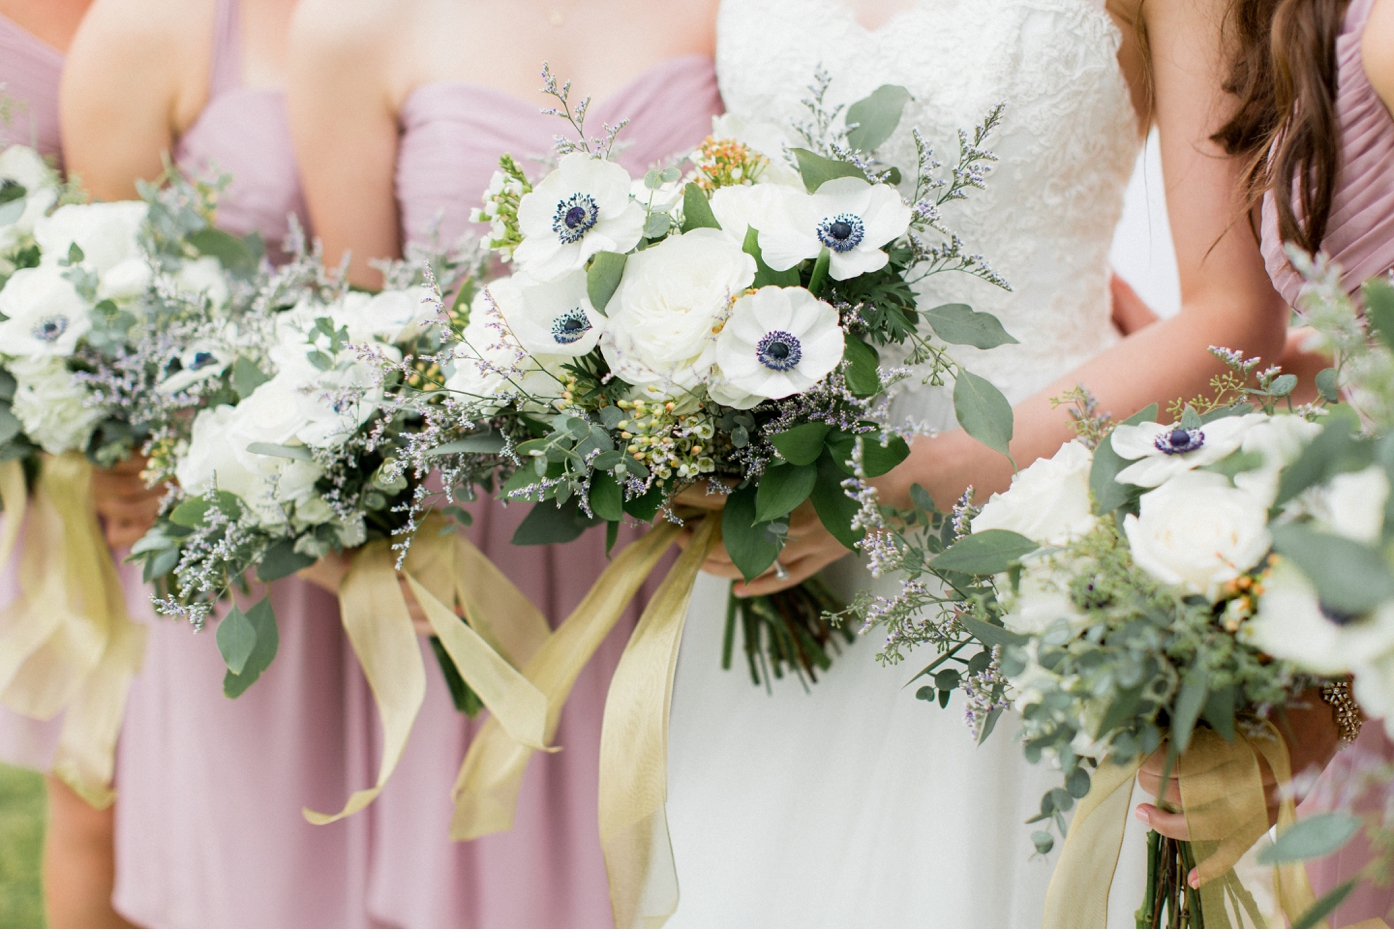 anemone, garden roses, and eucalyptus bouquets